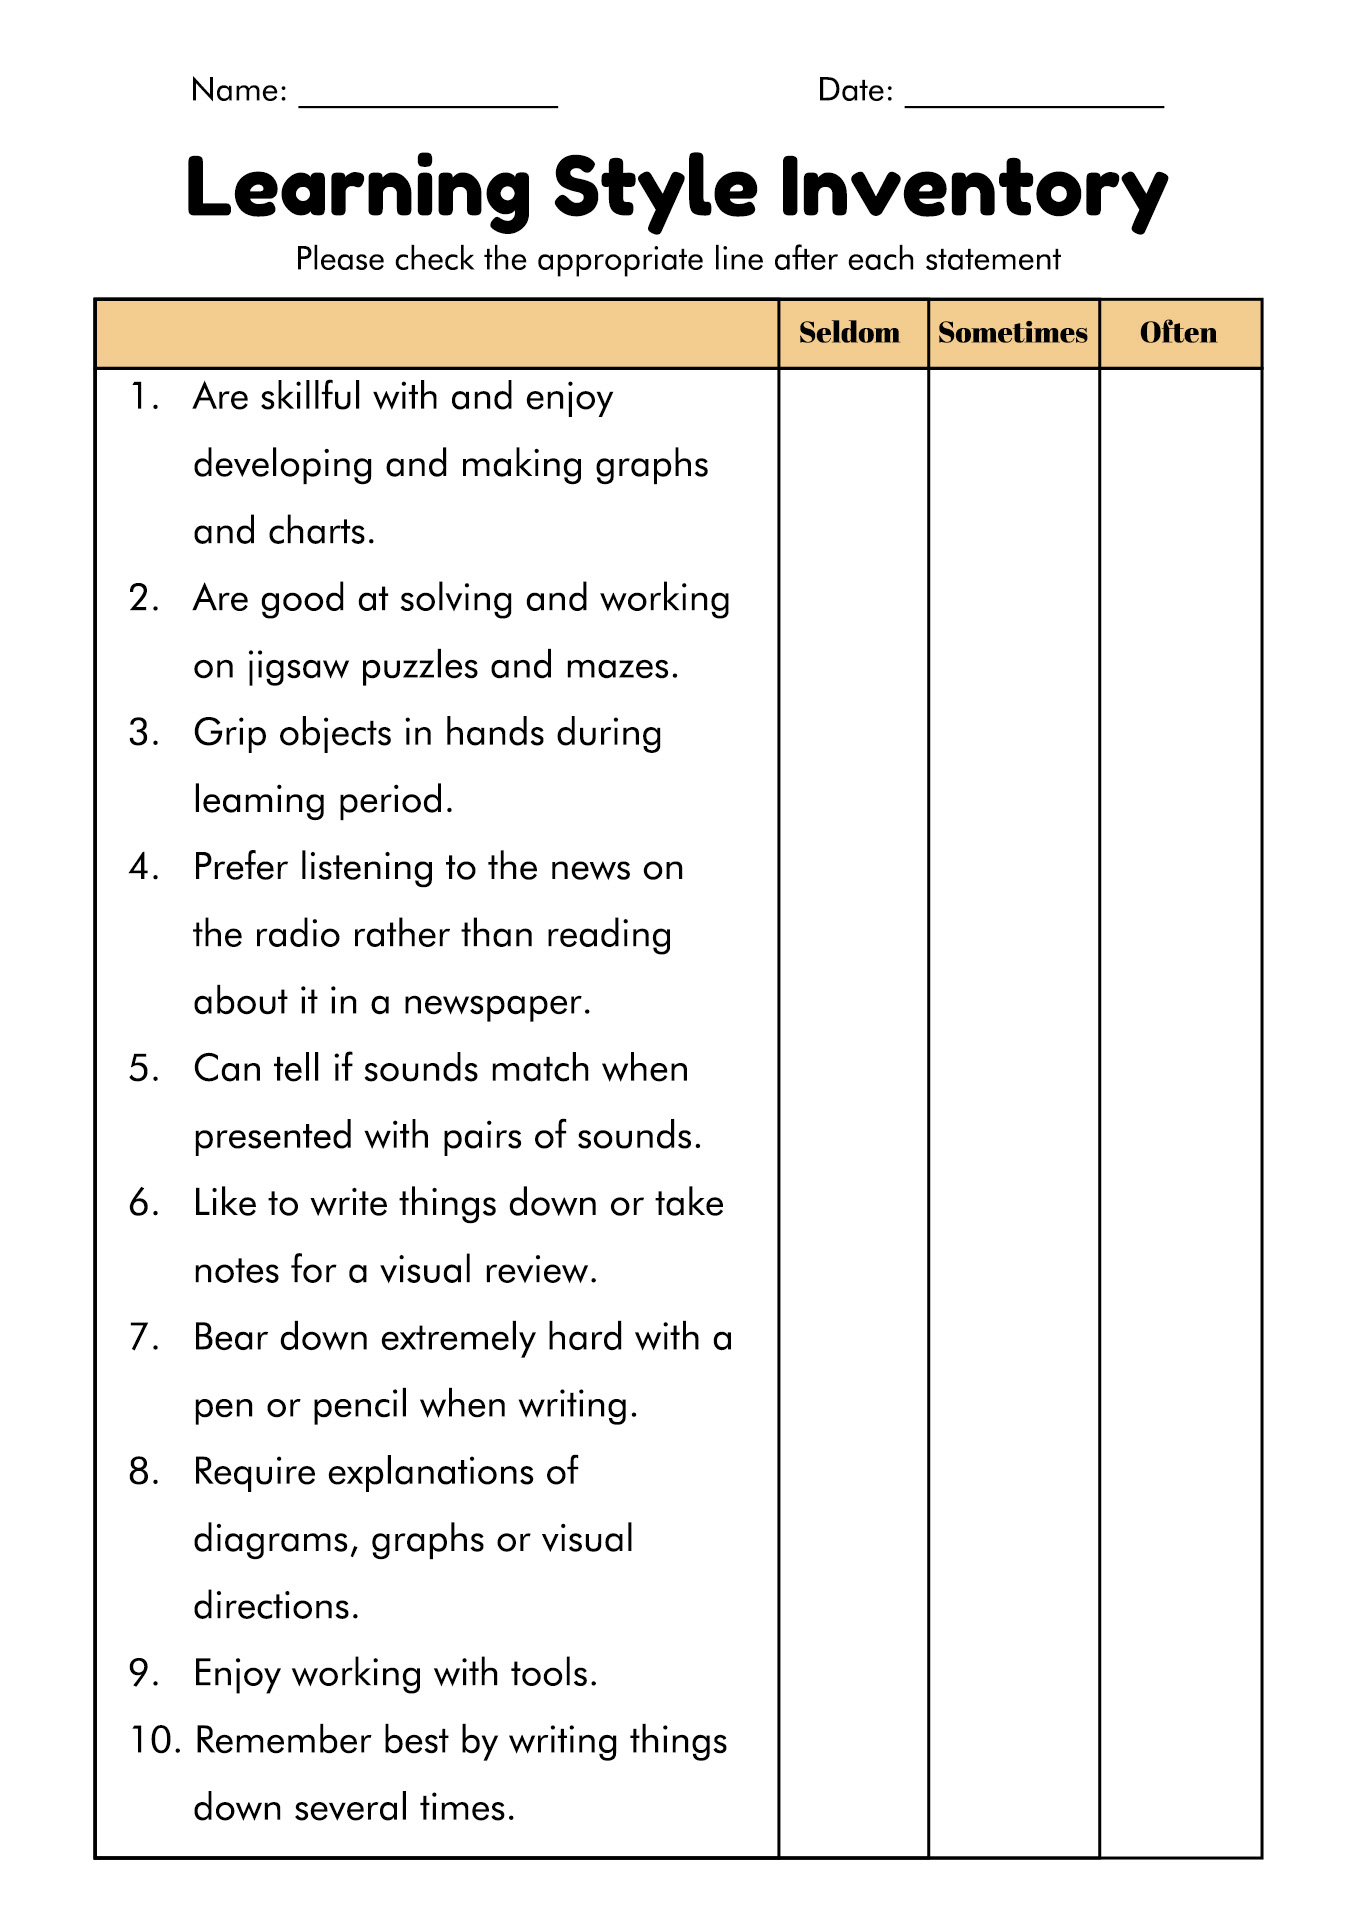 16-best-images-of-vark-styles-worksheet-learning-styles-visual-auditory-kinesthetic-learning